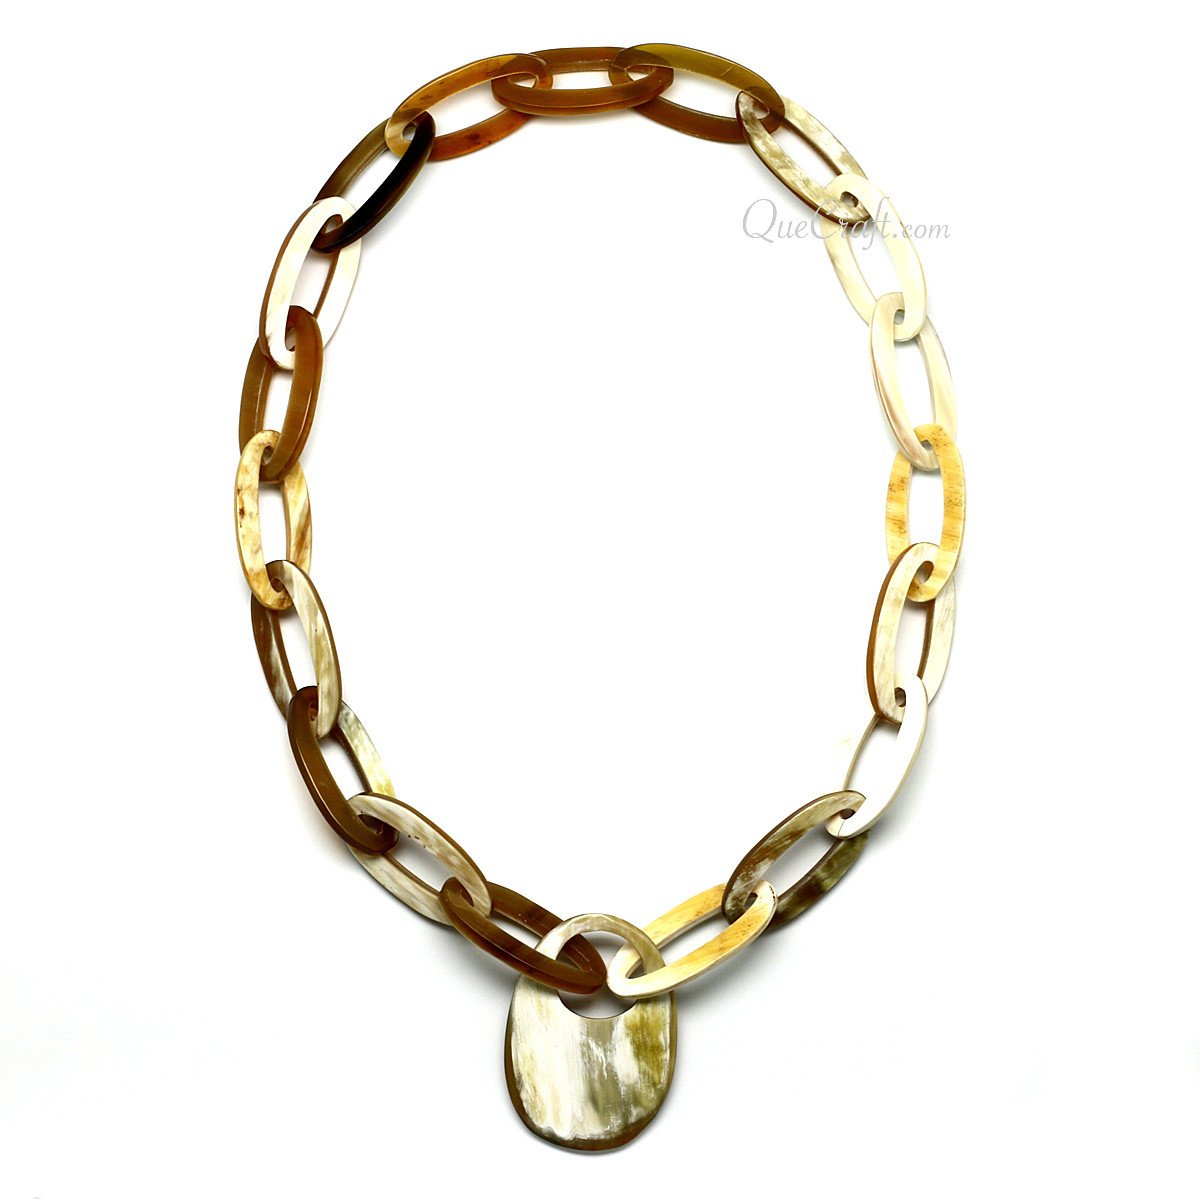 Horn Chain Necklace #10087 - HORN JEWELRY